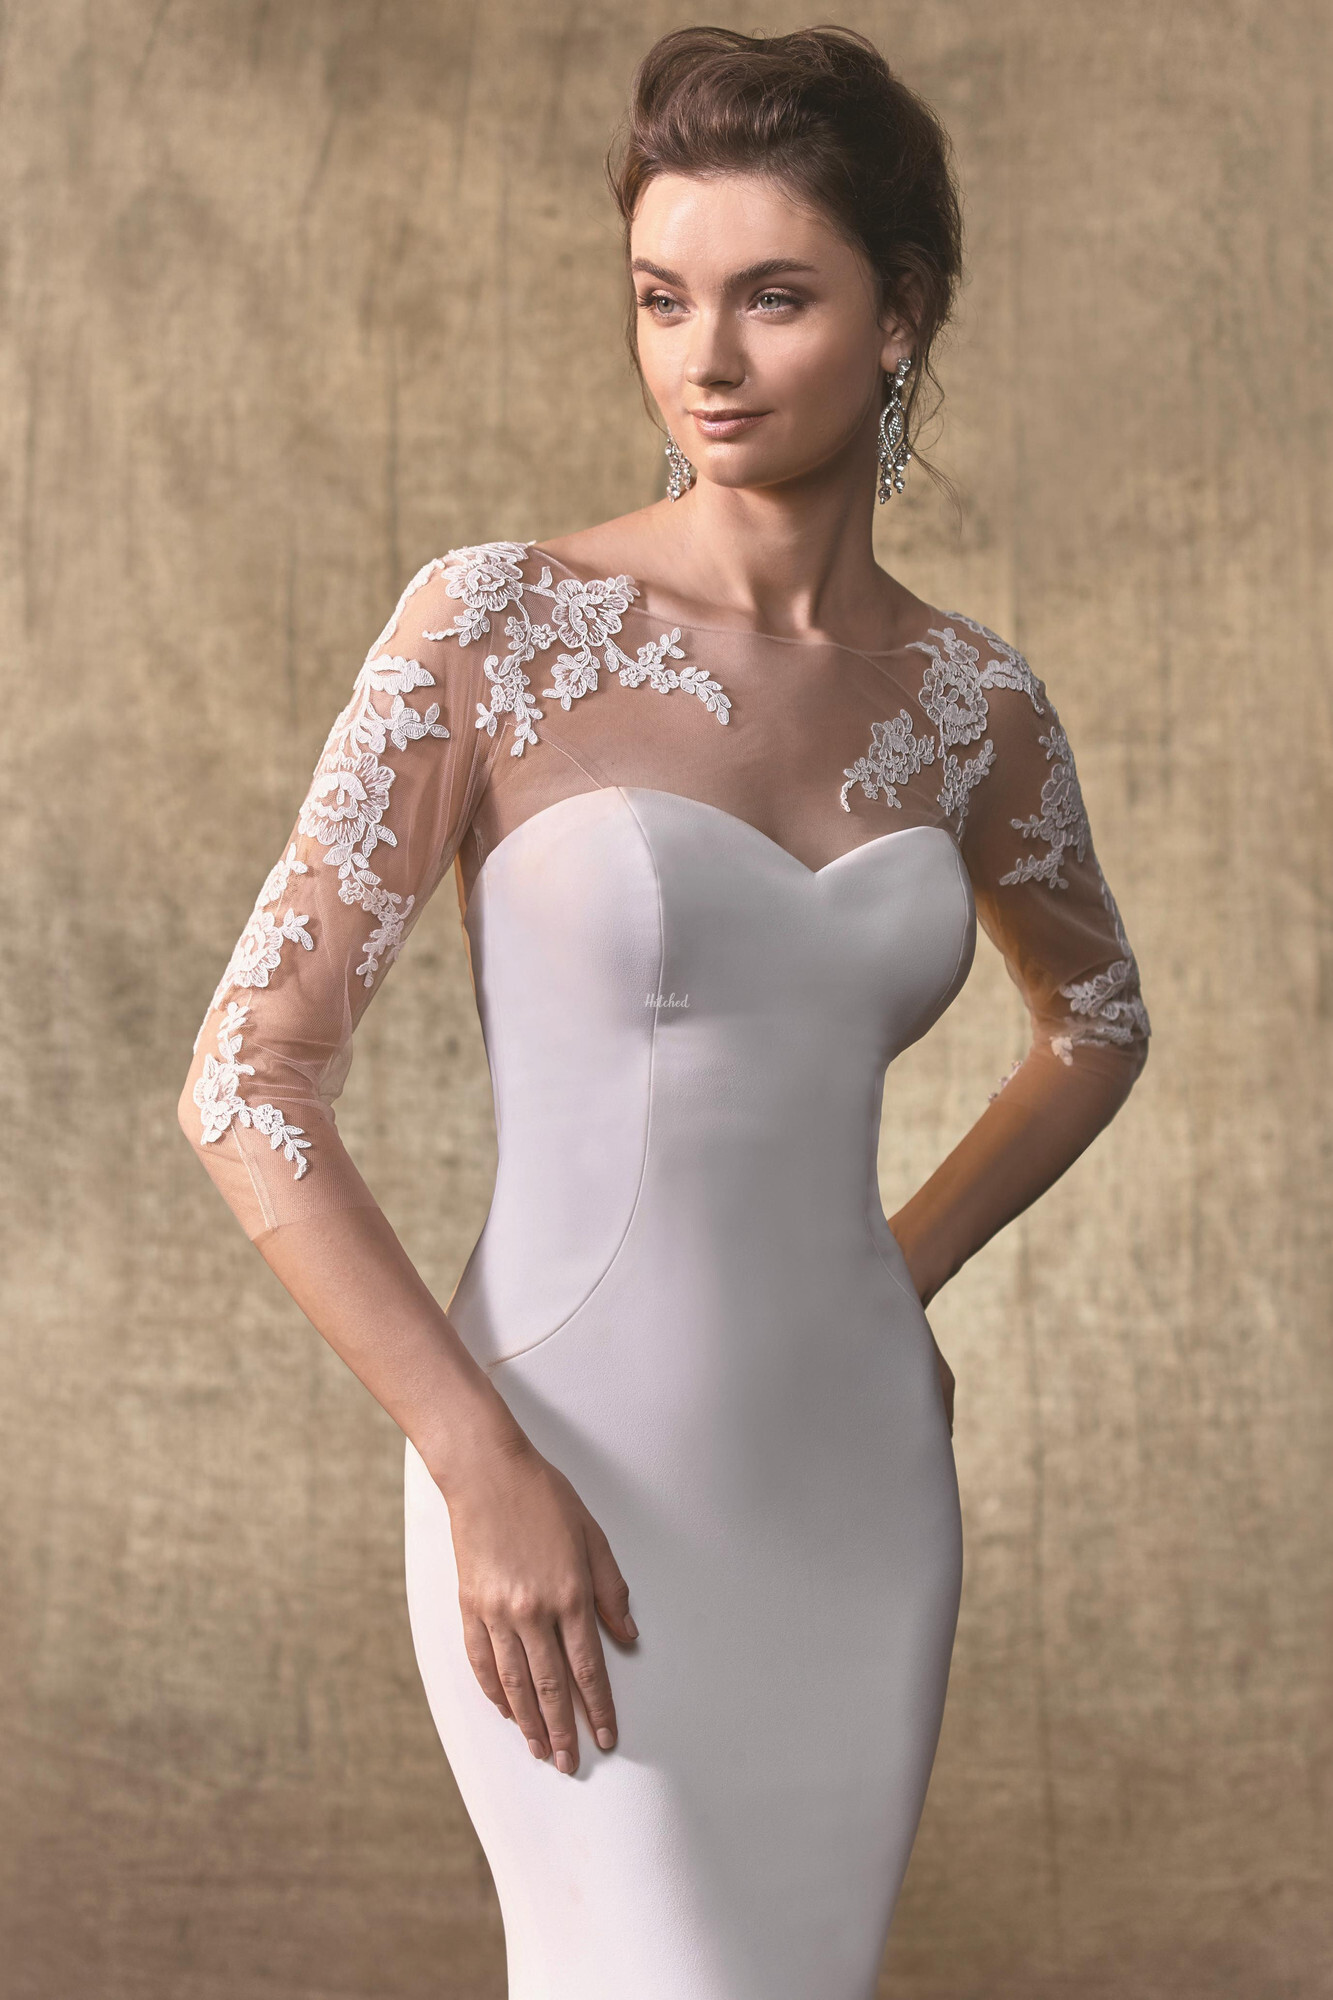 Lenore Wedding Dress from Enzoani - hitched.co.uk